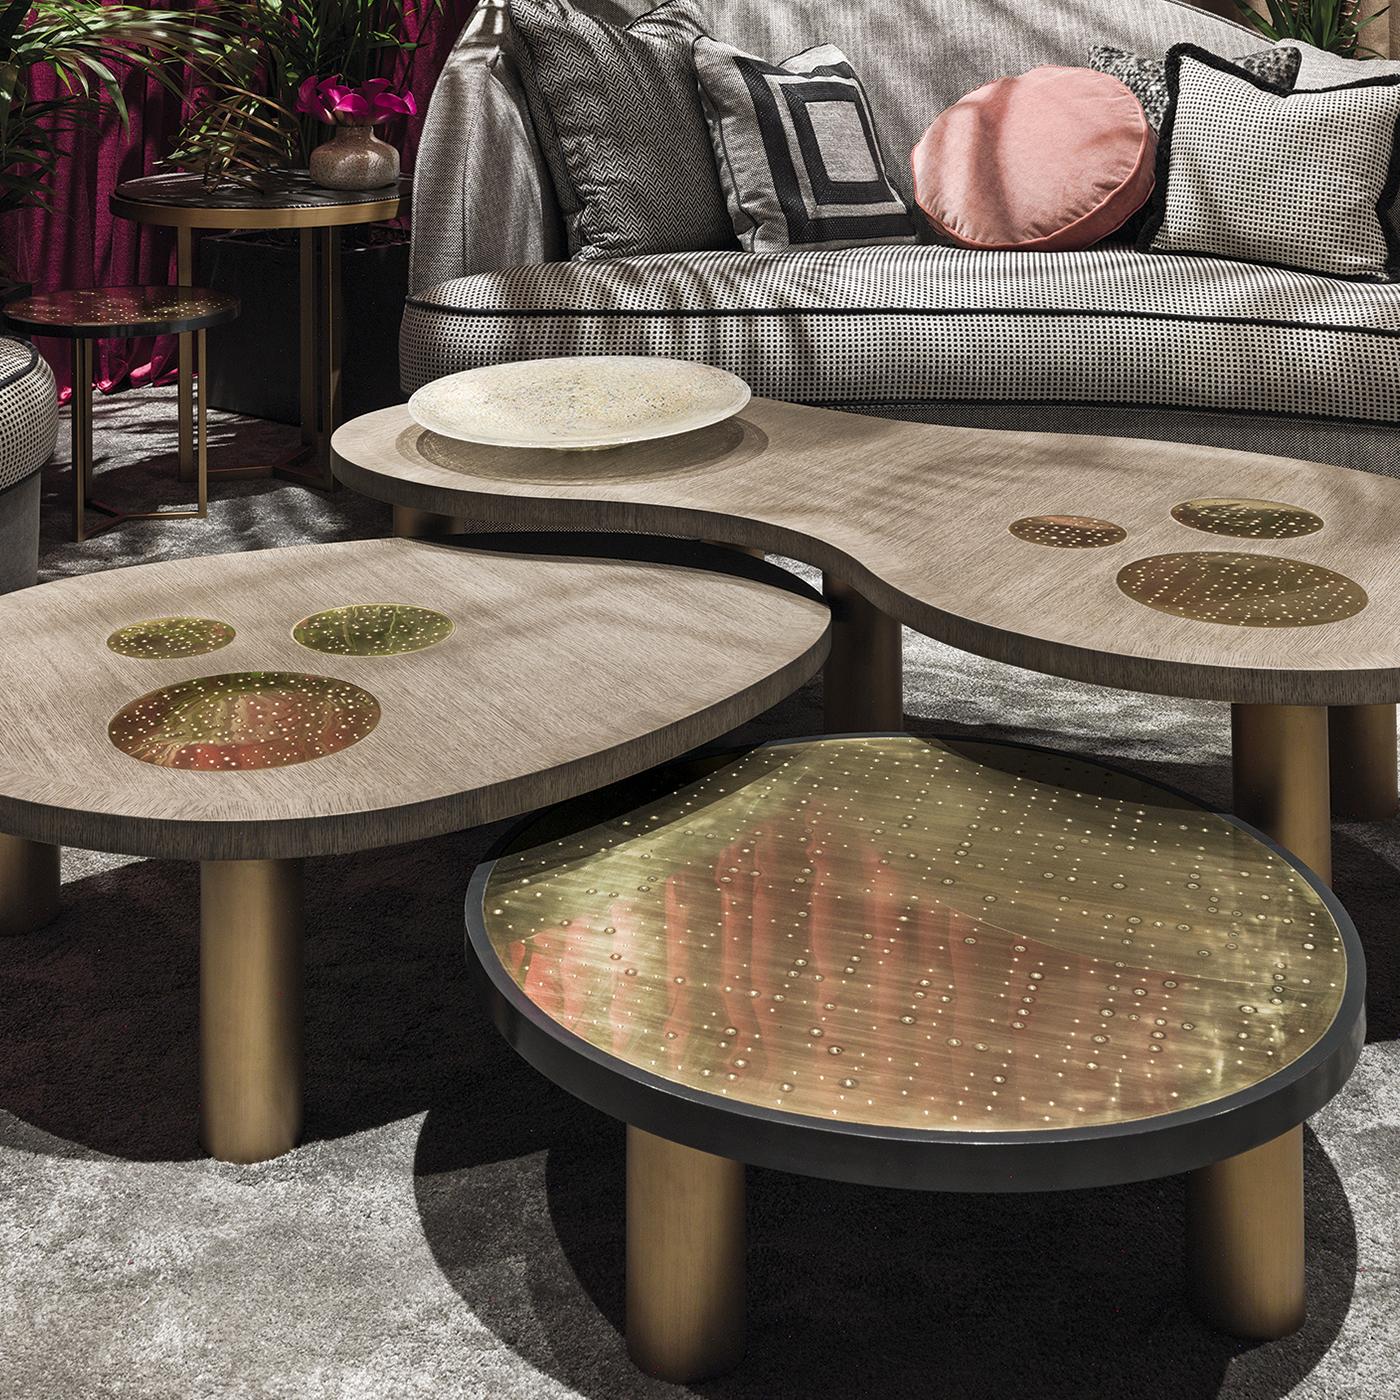 An original juxtaposition of warm and cool tones, the Jade oak coffee table by Chiara Provasi features an oak top accented with brass. Hand painted in gray, the table's top is the perfect frame for the glistening brass spots, further brought out by